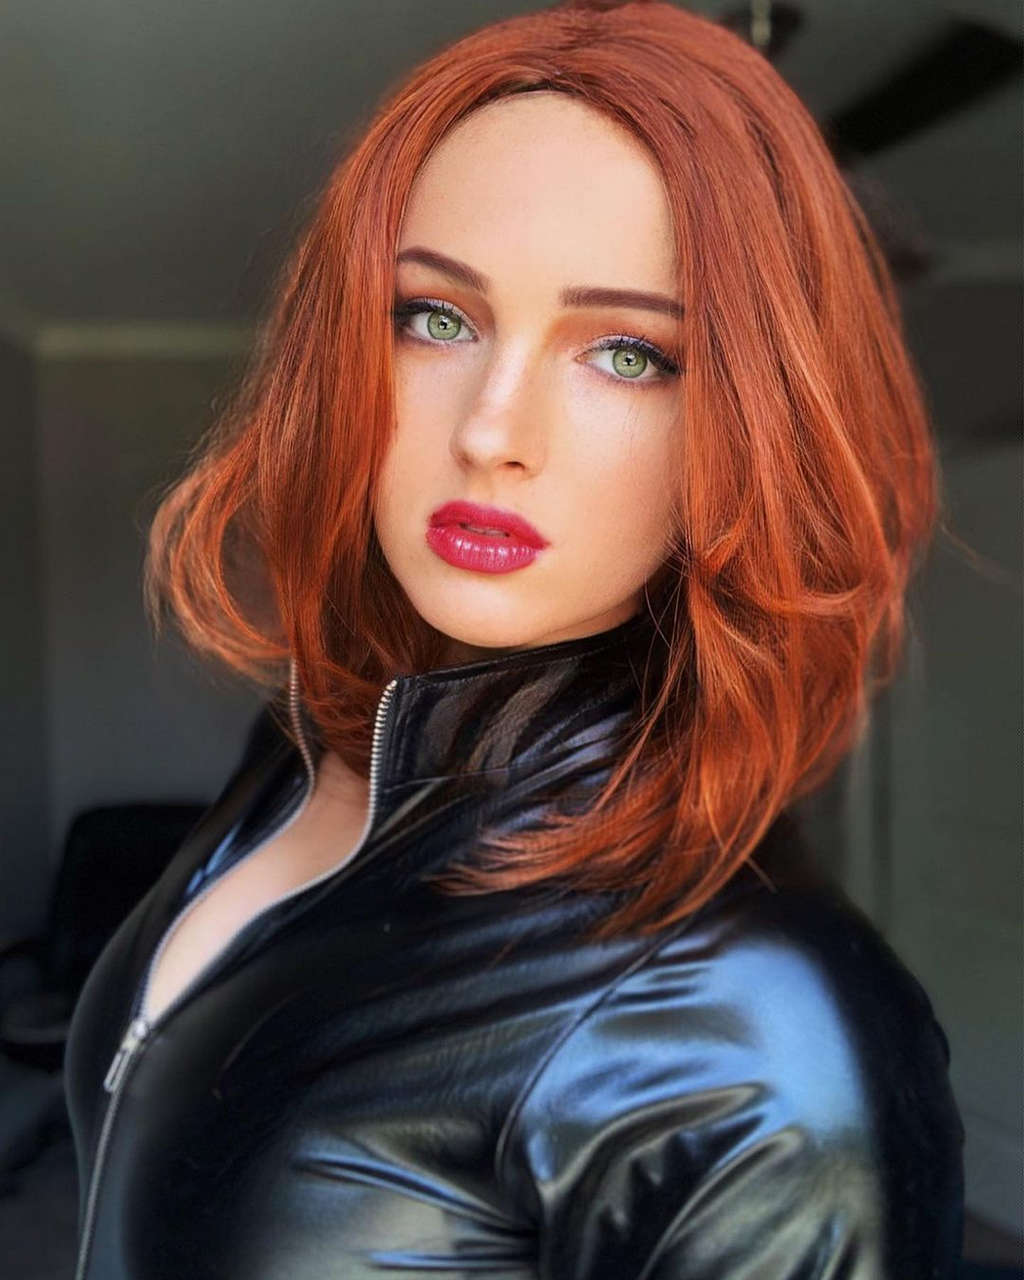 Black Widow From The Avengers By Michaela Lee